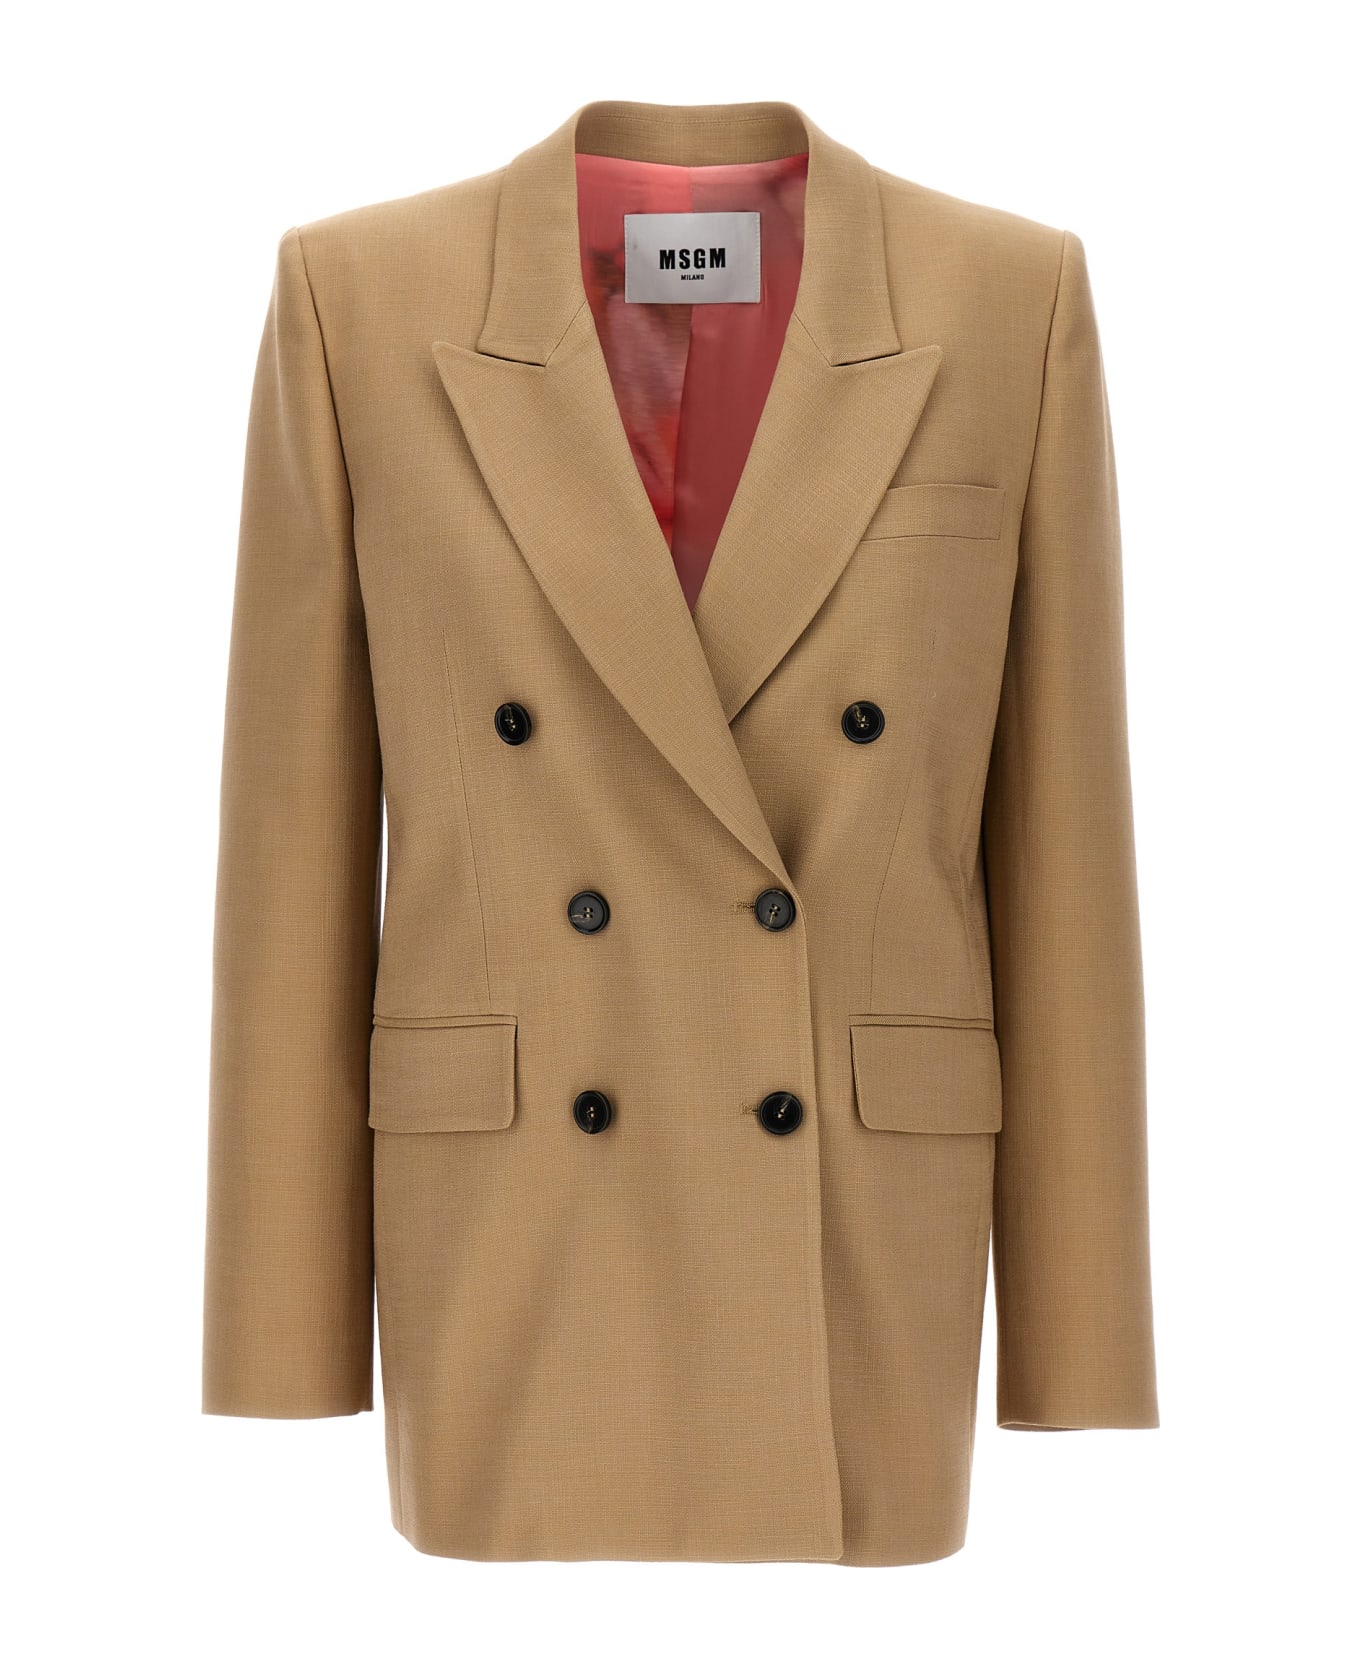 MSGM Double-breasted Blazer - Sand コート